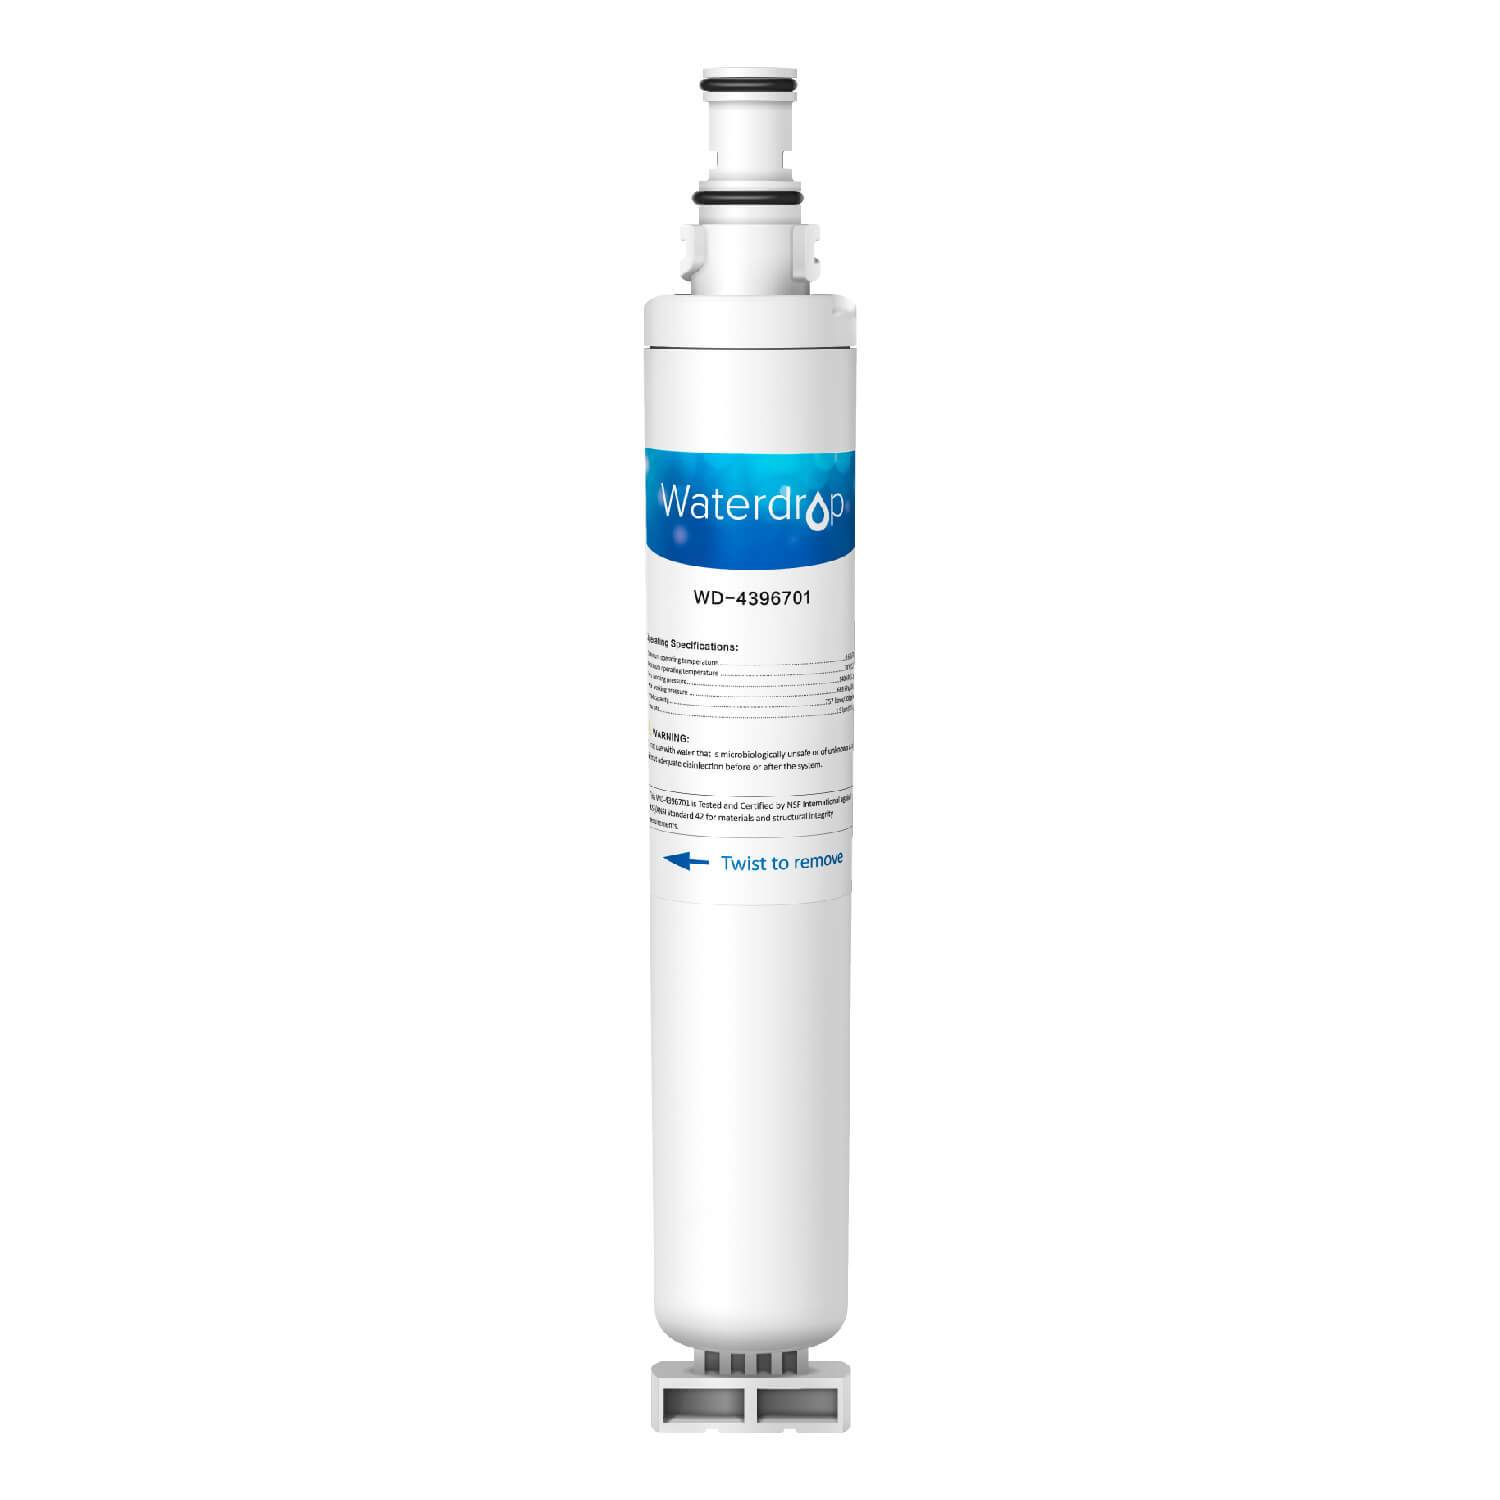 Waterdrop Replacement for EveryDrop by Whirlpool Filter 6 EDR6D1 Refrigerator Water Filter